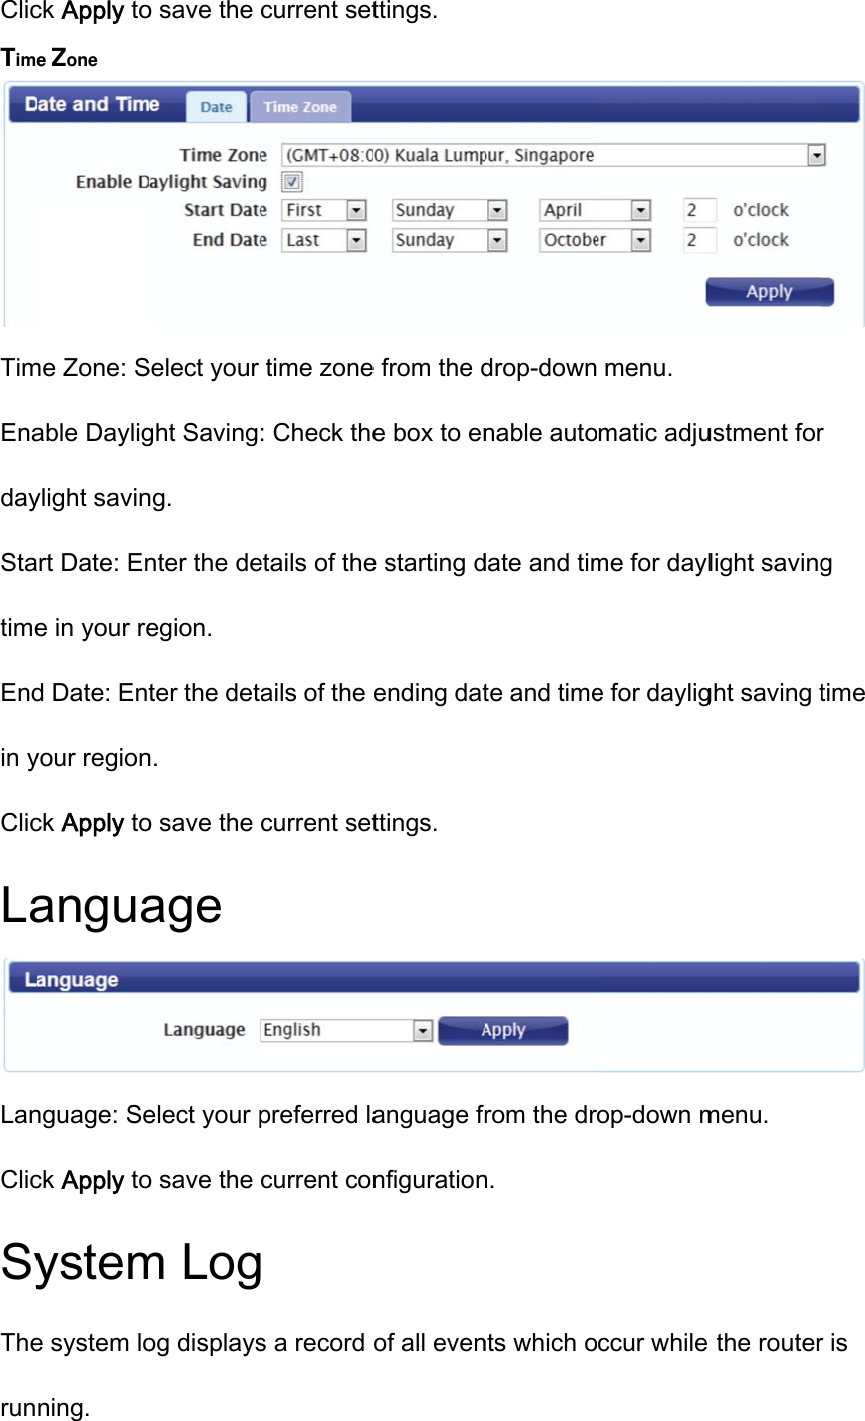 ClicTimeTimEnadayStatimeEndin yClicLaLanClicSyTherunck Apply toe Zone me Zone: Sable Dayligylight savinart Date: Ene in your red Date: Entyour regionck Apply toanguanguage: Seck Apply toysteme system loning. o save the Select your ght Savingng. nter the deegion. ter the detn. o save the age elect your po save the m Logog displayscurrent settime zone: Check theetails of theails of the current setpreferred lacurrent con s a record ttings. e from the de box to ene starting dending datttings. anguage frnfigurationof all evendrop-downnable autodate and timte and timerom the drn. nts which omenu. matic adjume for dayle for dayligop-down mccur while ustment forlight savingght saving tmenu.  the router r g time  r is 